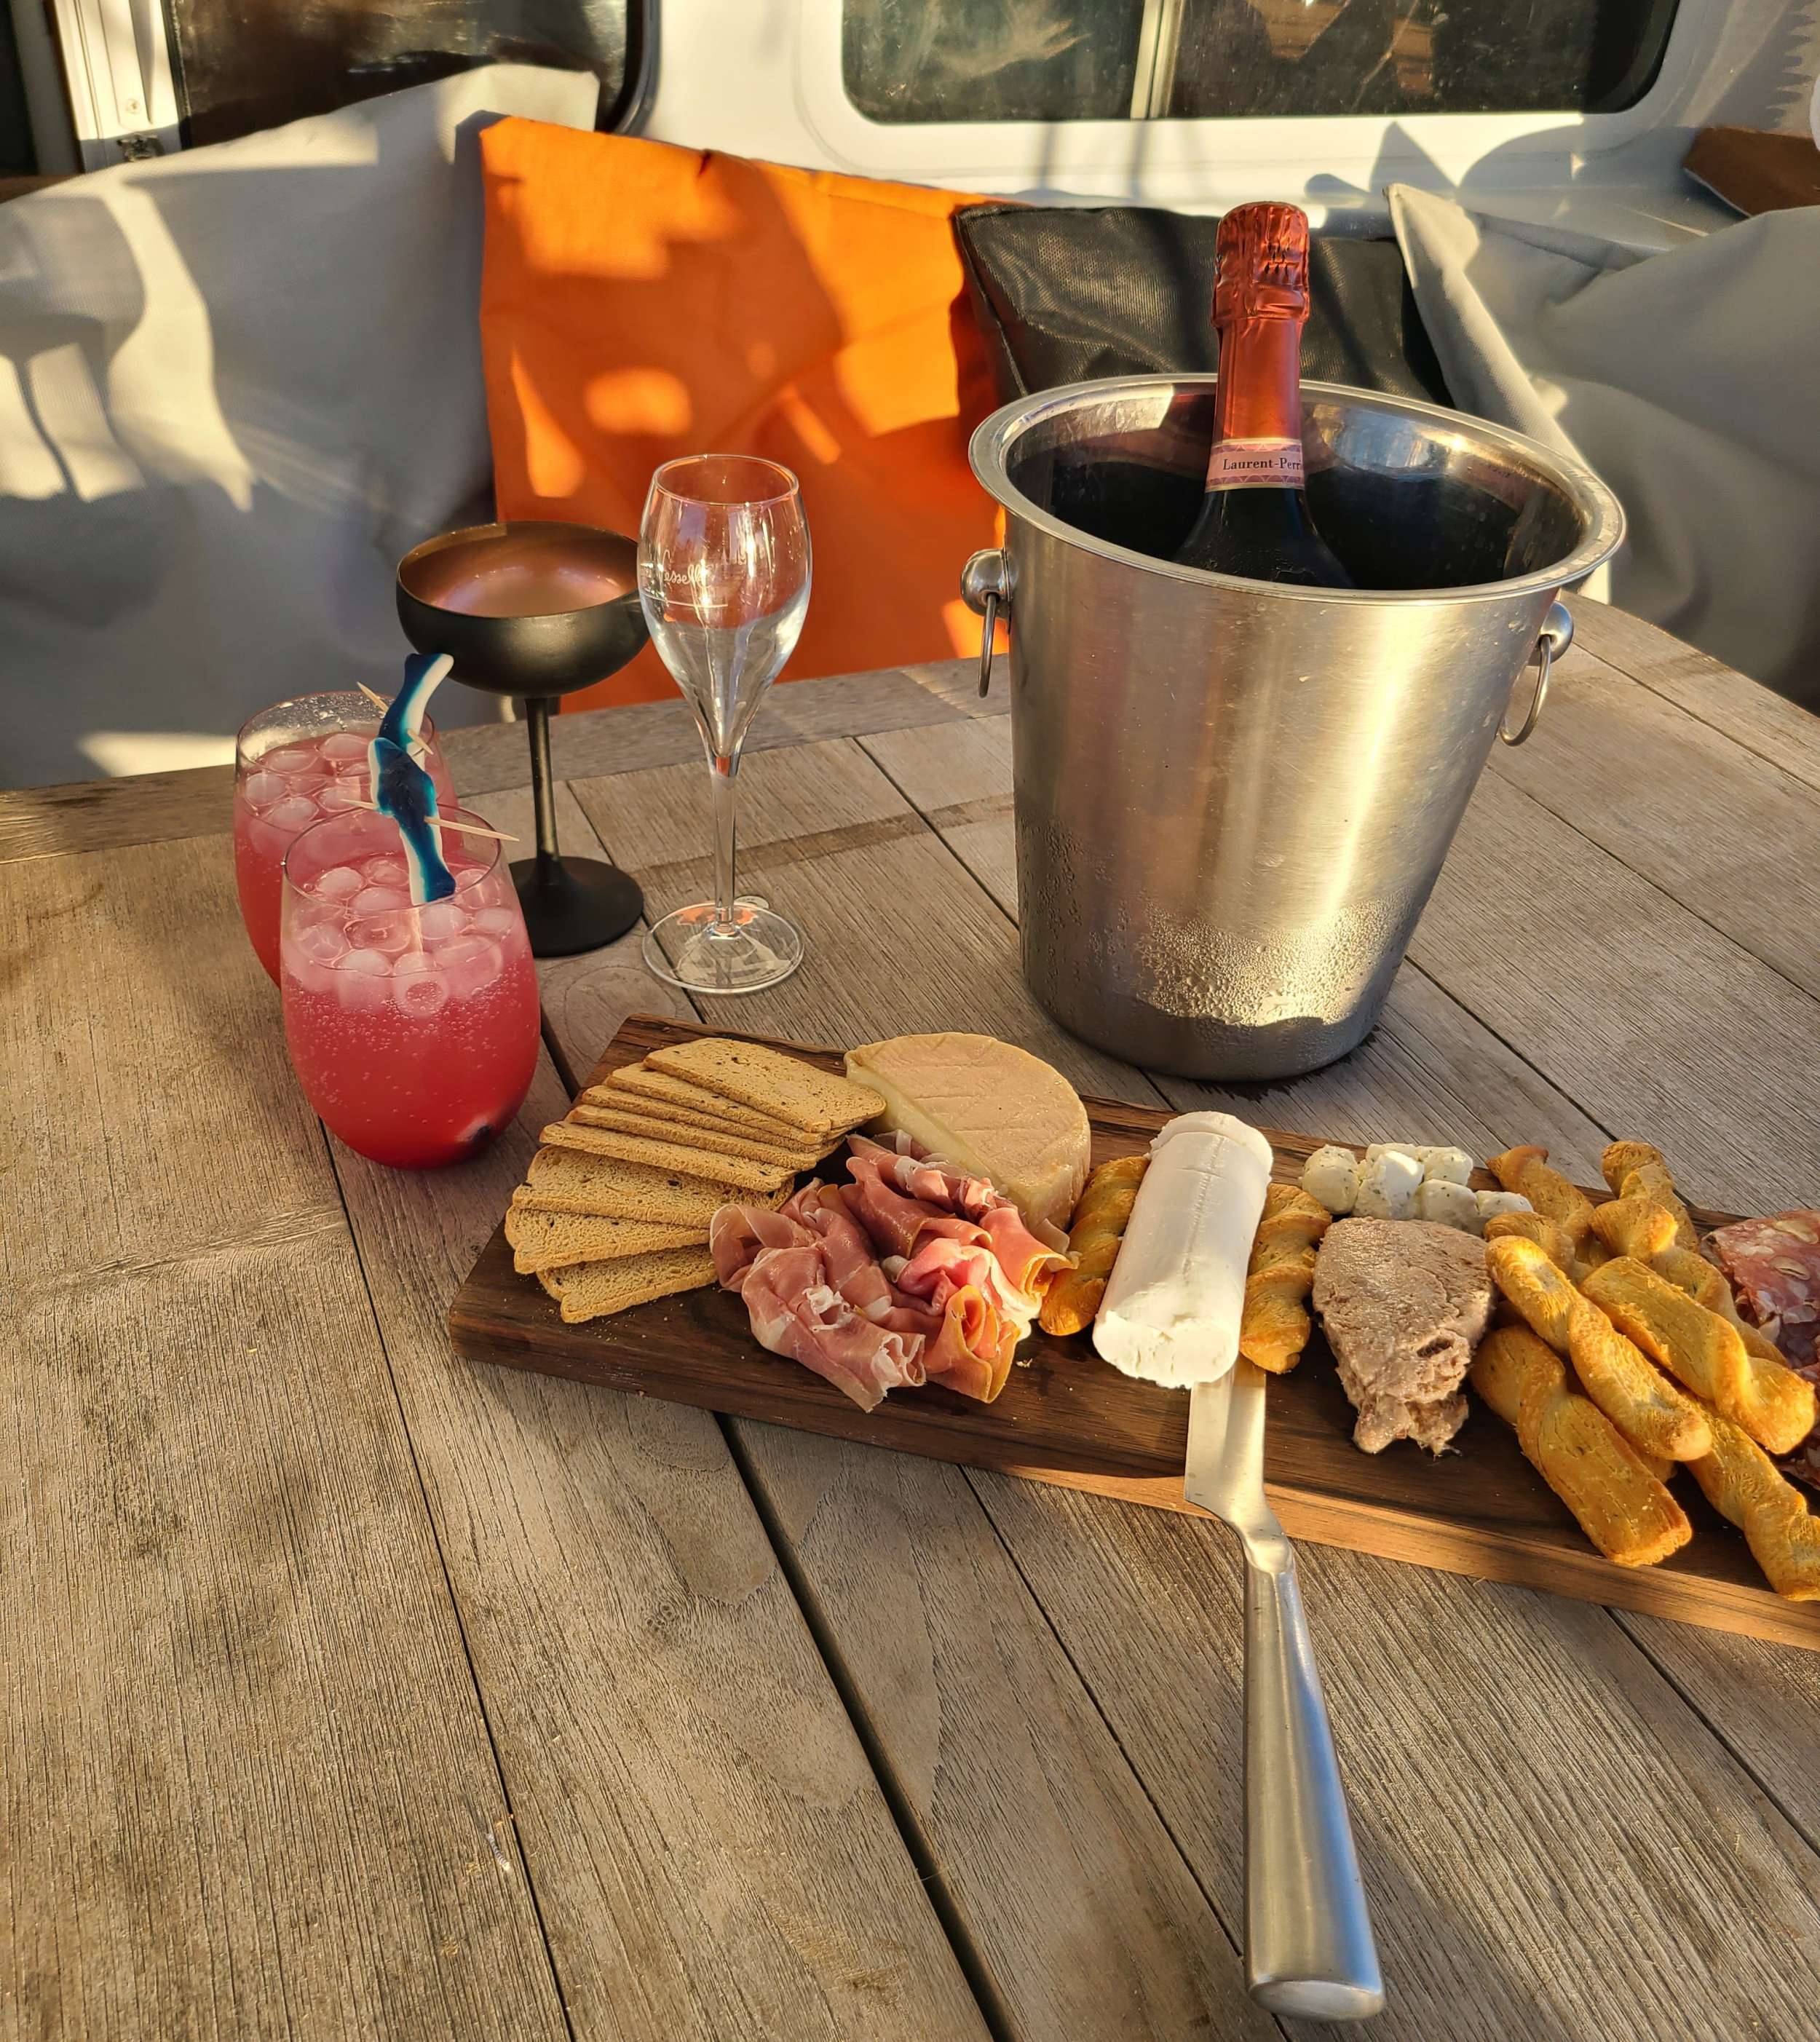 MIMBAW Yacht Charter - Charcuterie on the aft deck